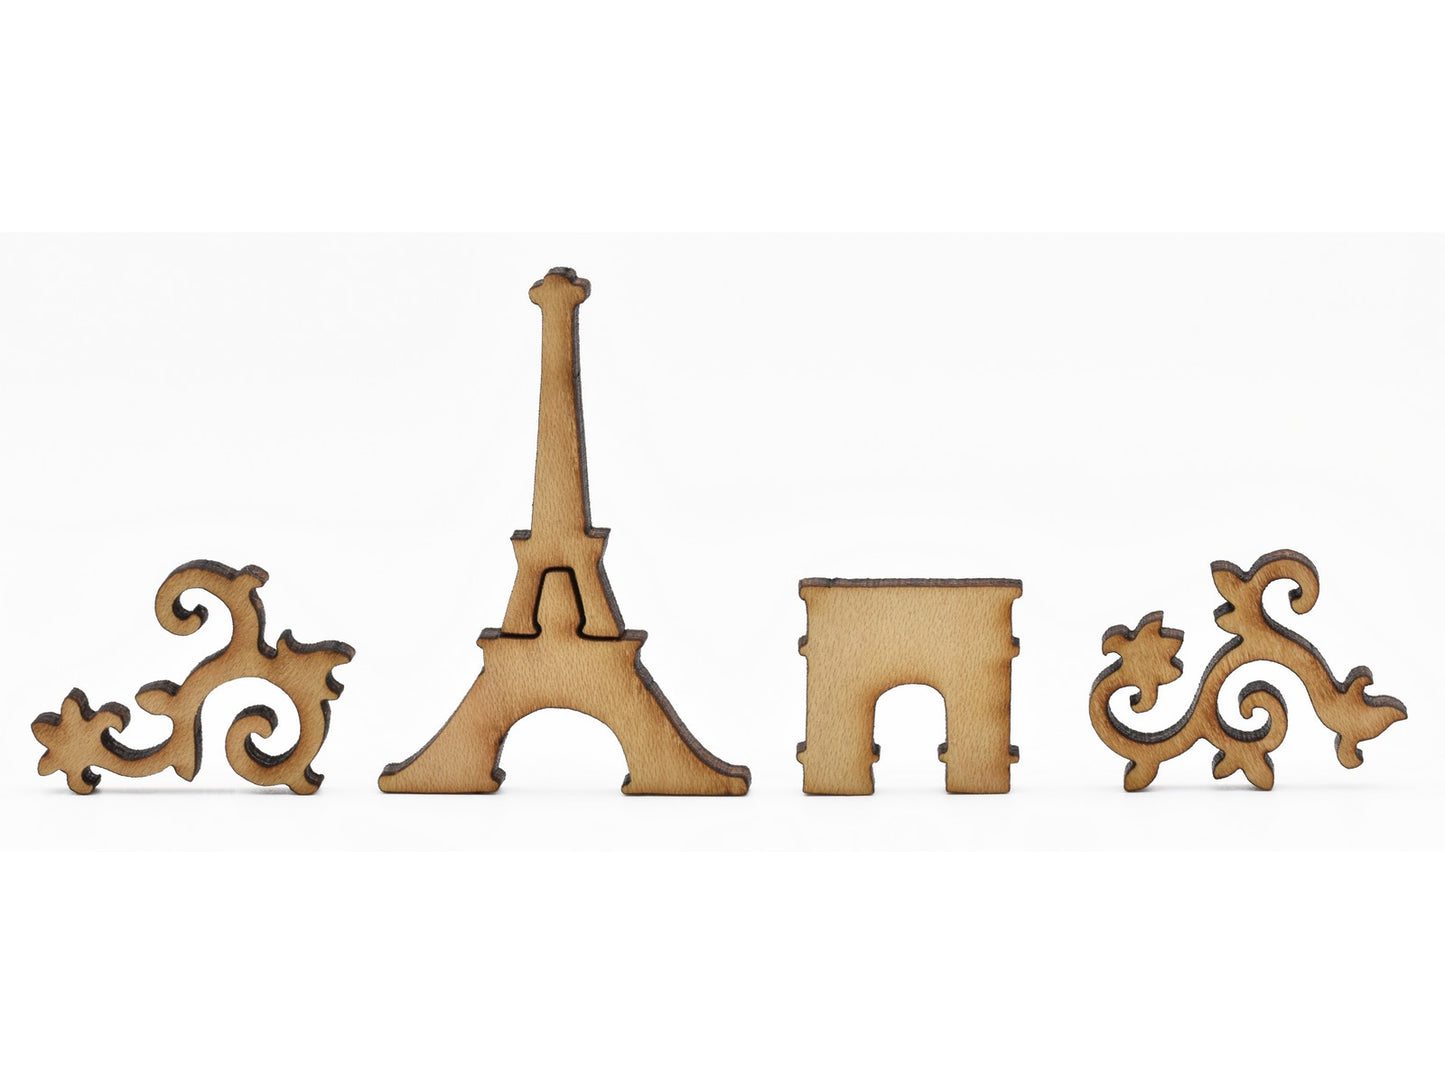 A closeup of pieces in the shape of the Eiffel tower and the arc de triomphe.